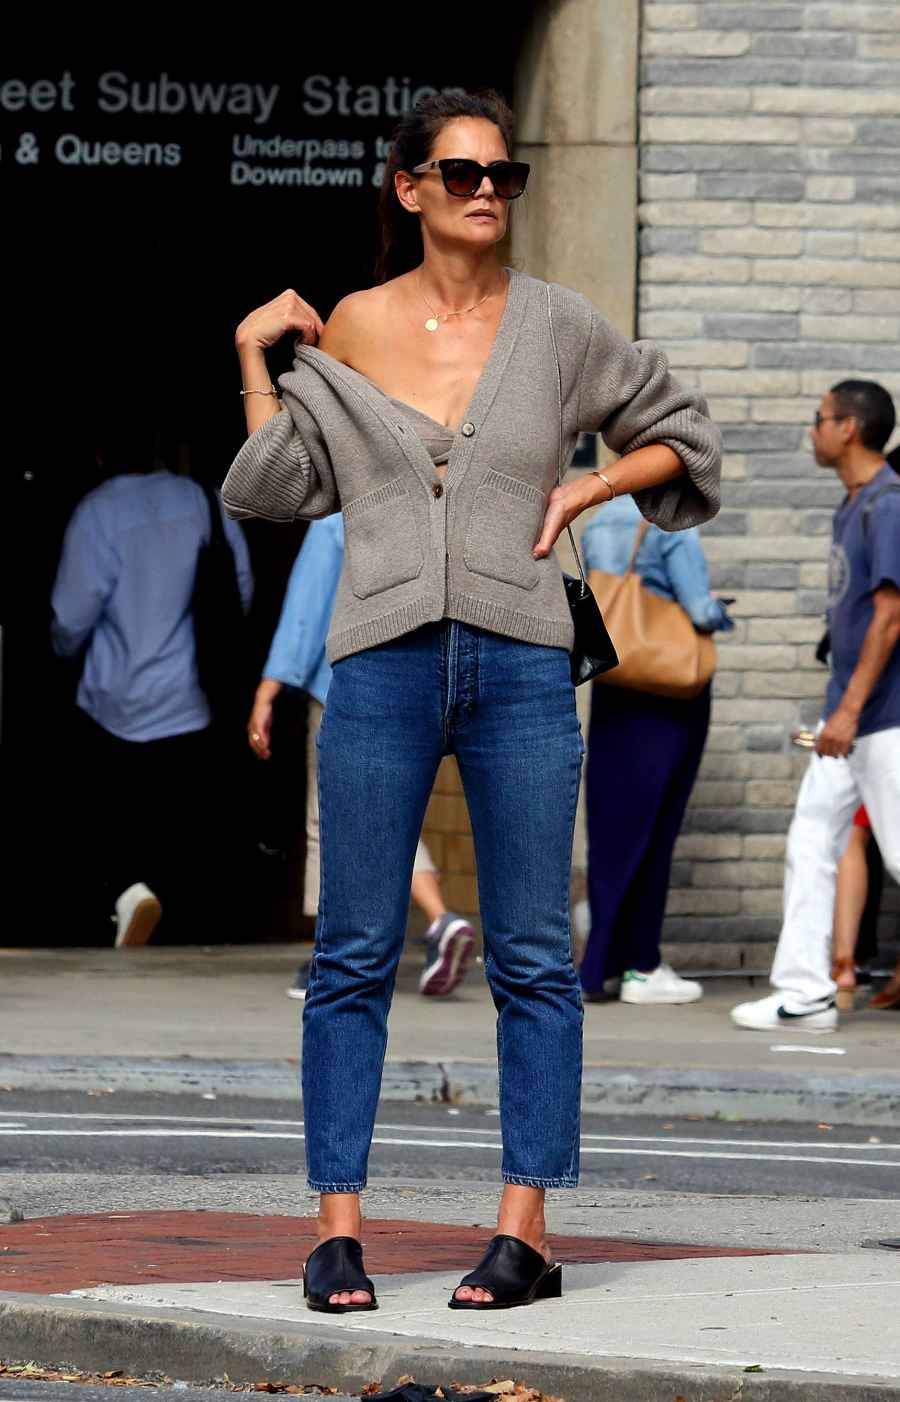 Katie Holmes Wears Revealing Outfit in New York City After Jamie Foxx Split